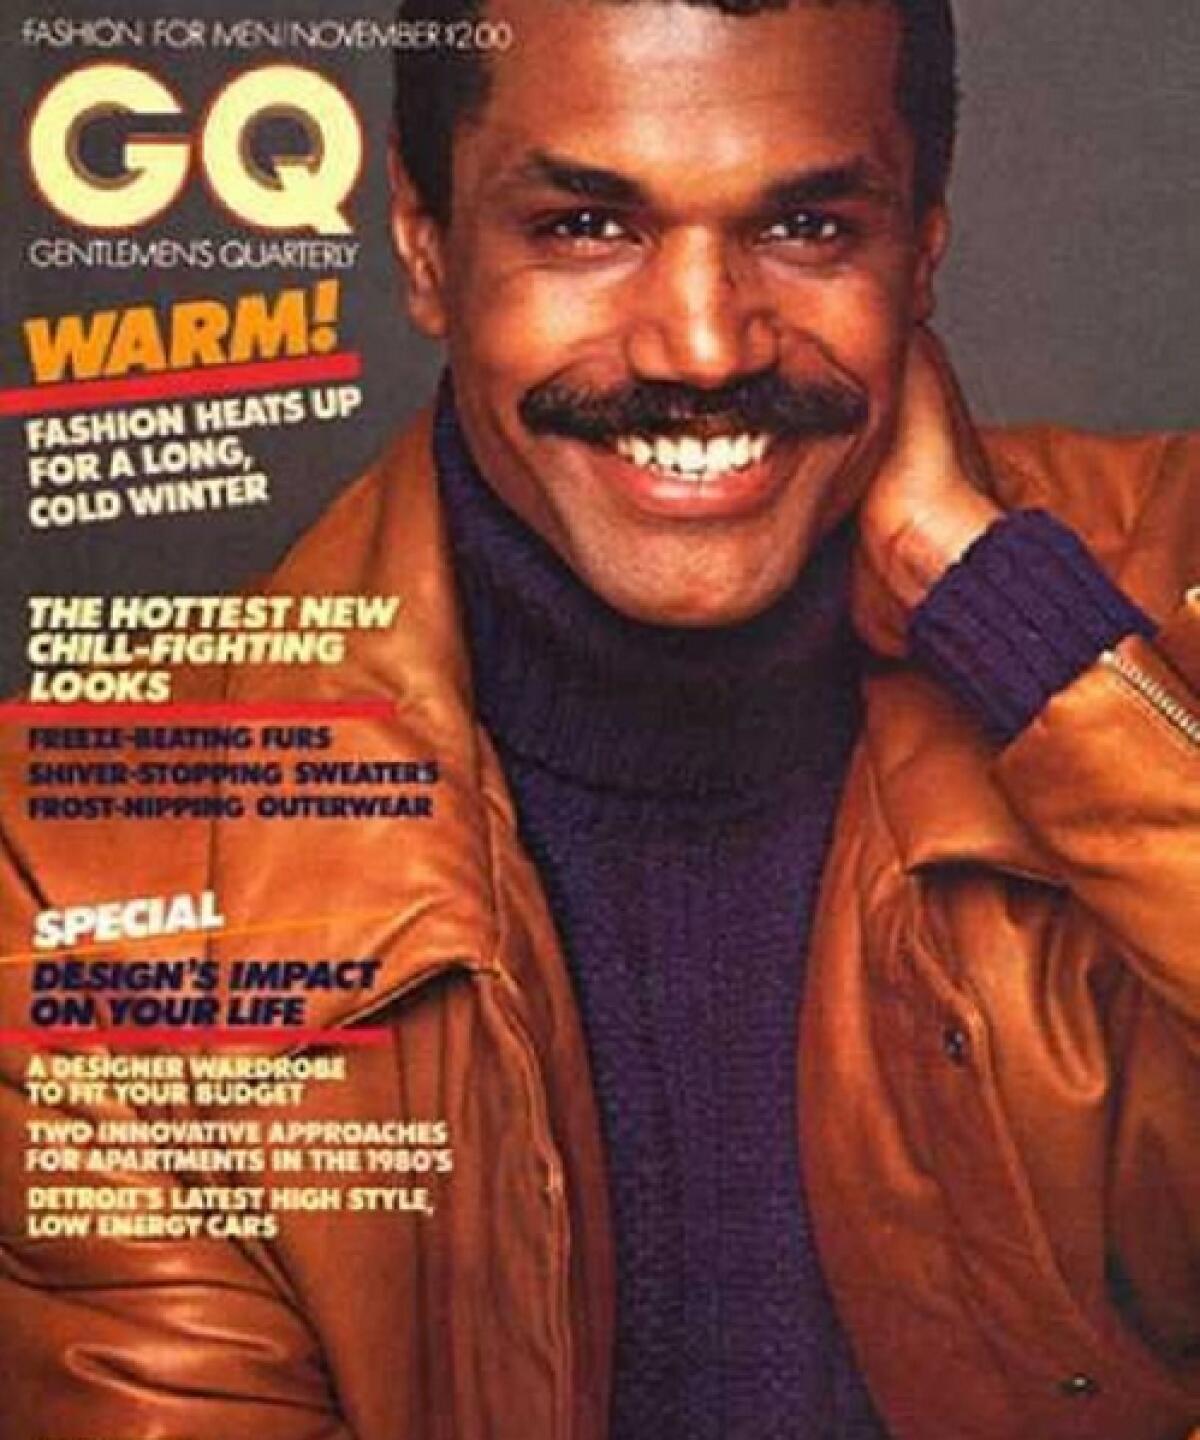 A cover of GQ magazine featuring model Renauld White wearing a brown leather jacket and a dark purple turtleneck sweater